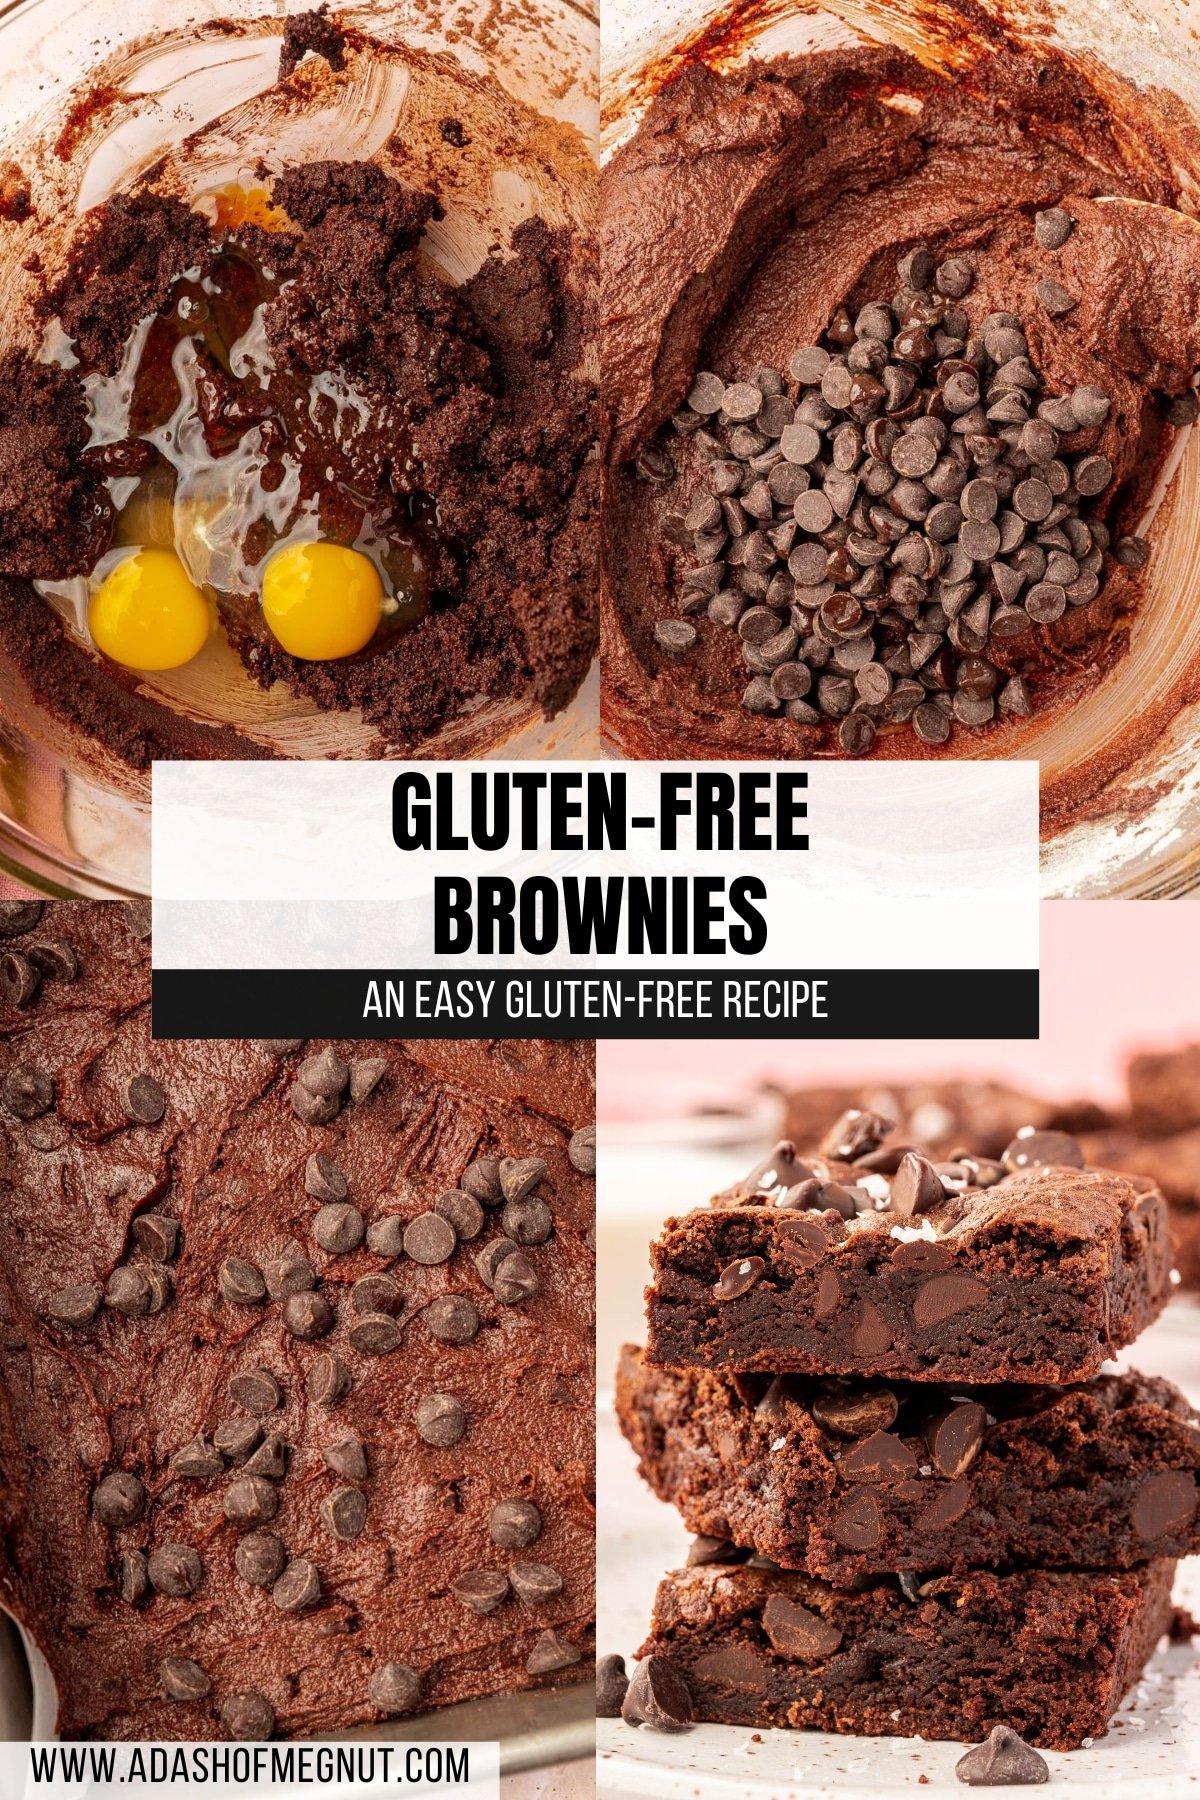 A four photo collage showing the process of making gluten-free brownies. Photo 1: A glass mixing bowl with a chocolate mixture topped with two eggs before mixing together. Photo 2: A gluten-free brownie batter topped with a pile of semi-sweet chocolate chips before mixing in. Photo 3: A closeup of gluten-free brownie batter topped with semi-sweet chocolate chips in a square baking pan. Photo 4: A stack of three gluten-free brownies on a dessert plate topped with semi-sweet chocolate chips and flaky sea salt.